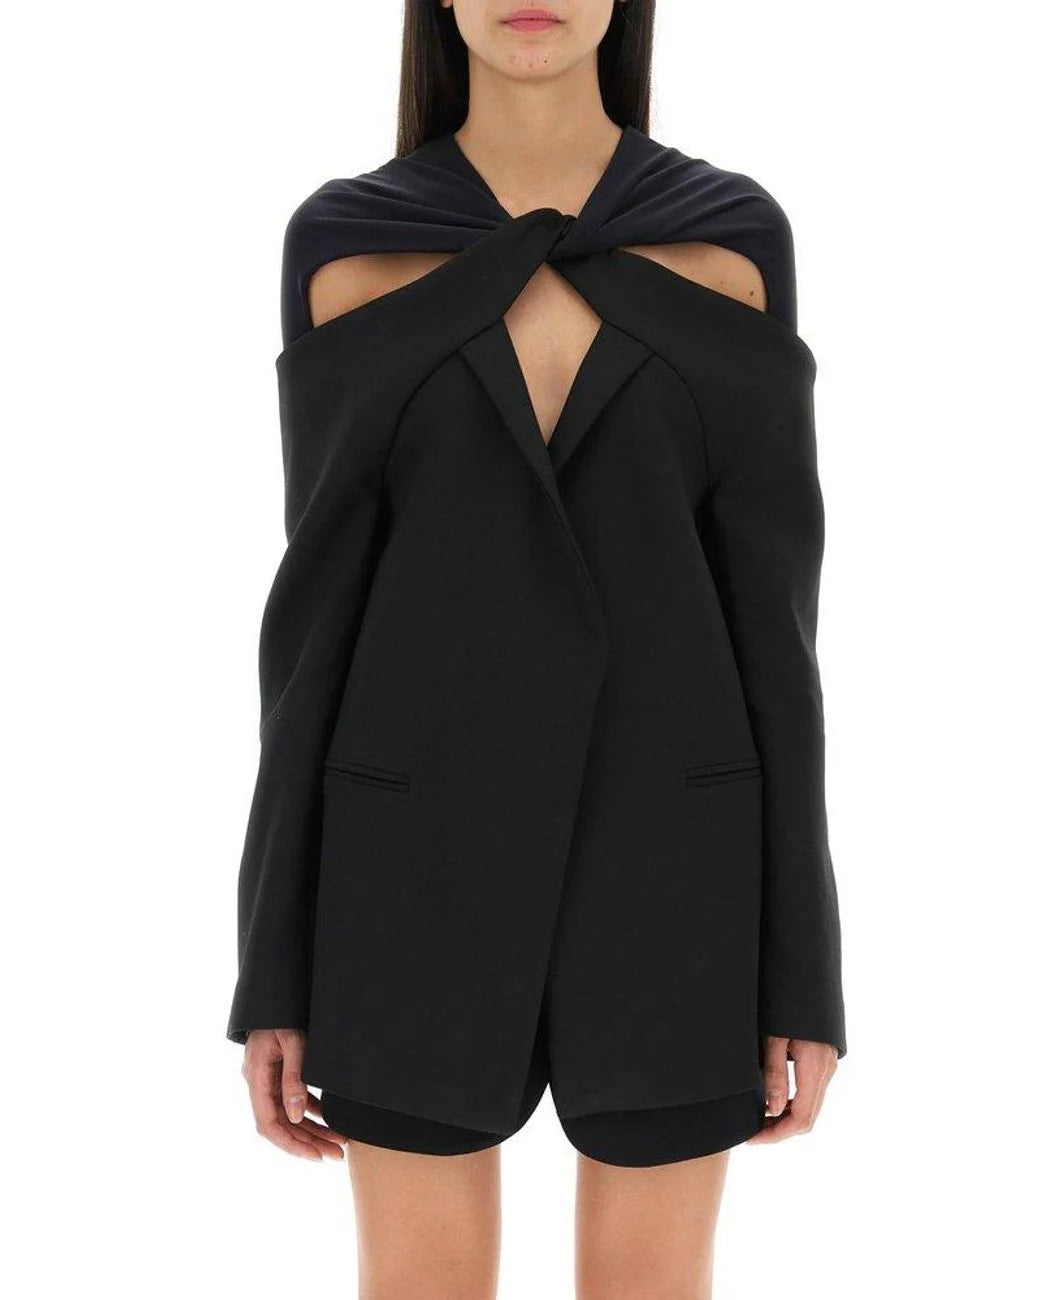 Twisted Cut Out Jacket